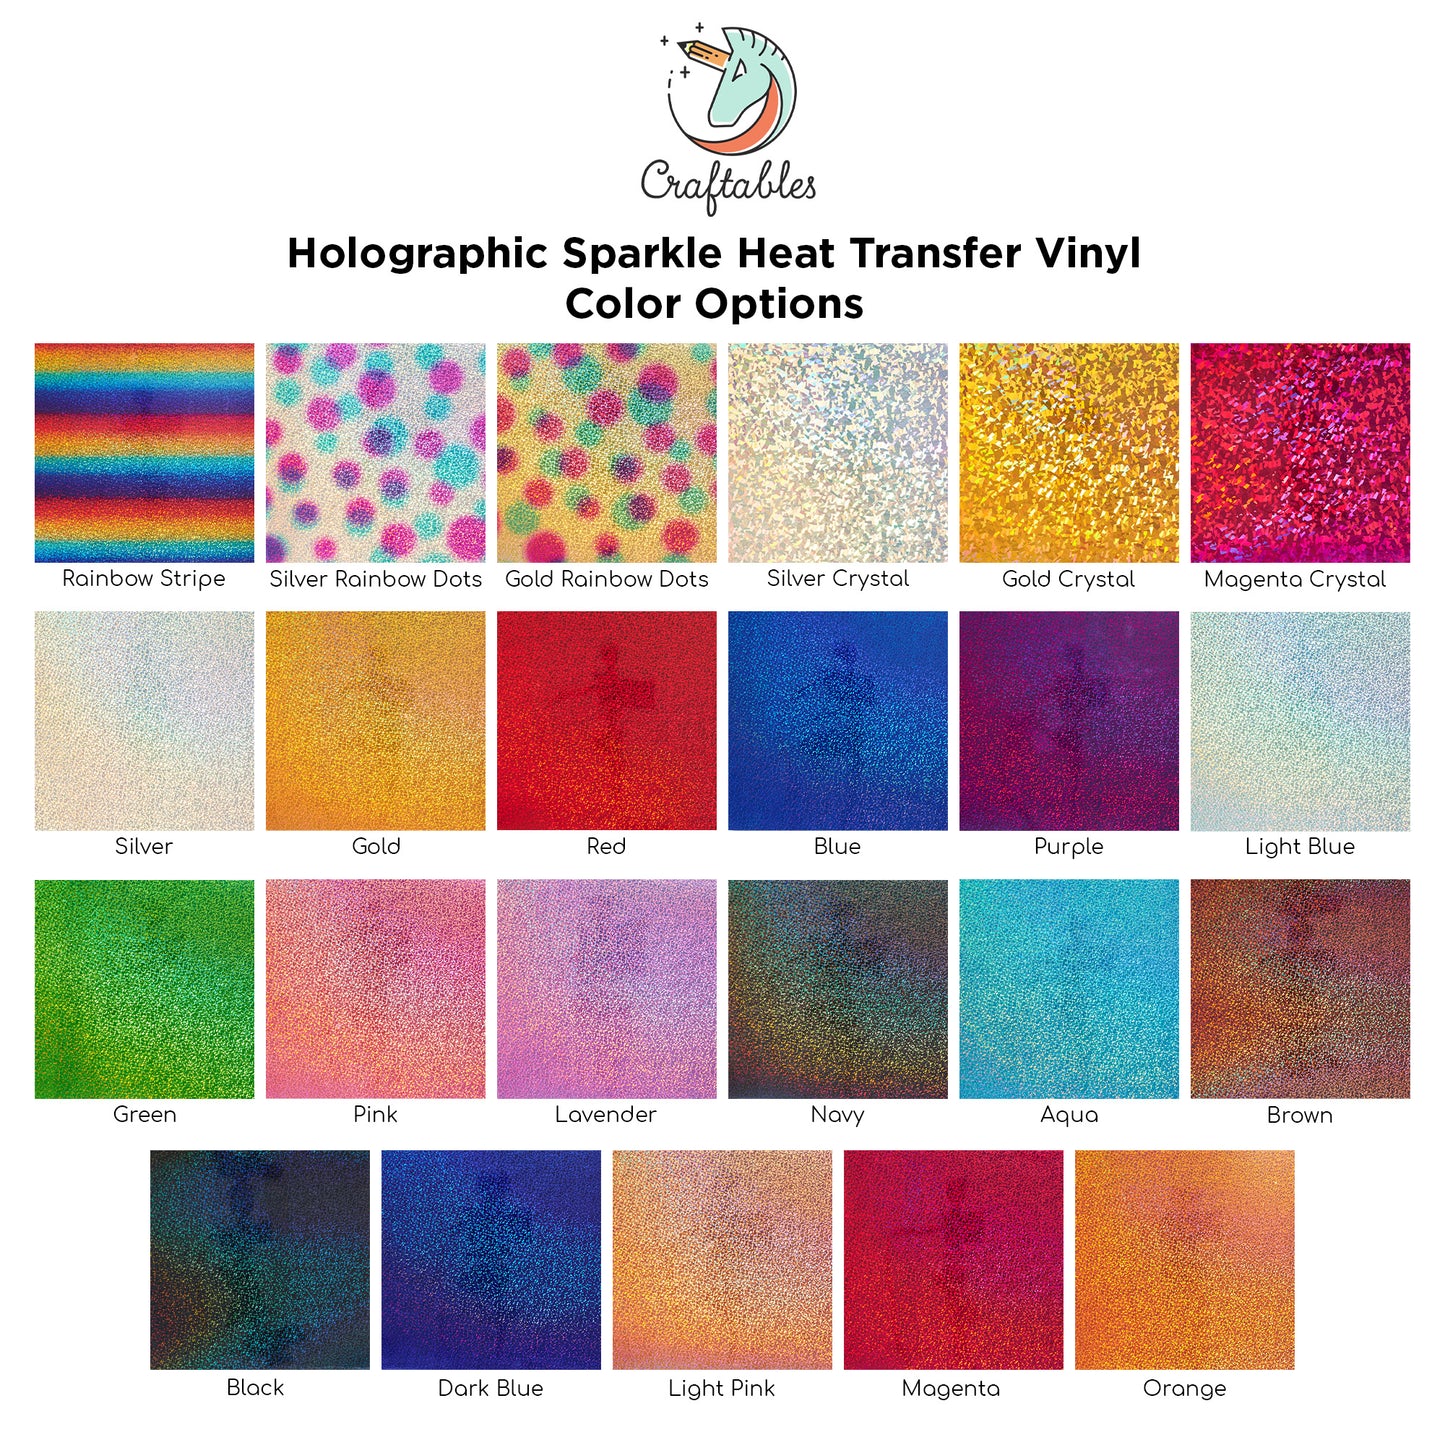 Blue Holographic Sparkle Heat Transfer Vinyl Sheets By Craftables